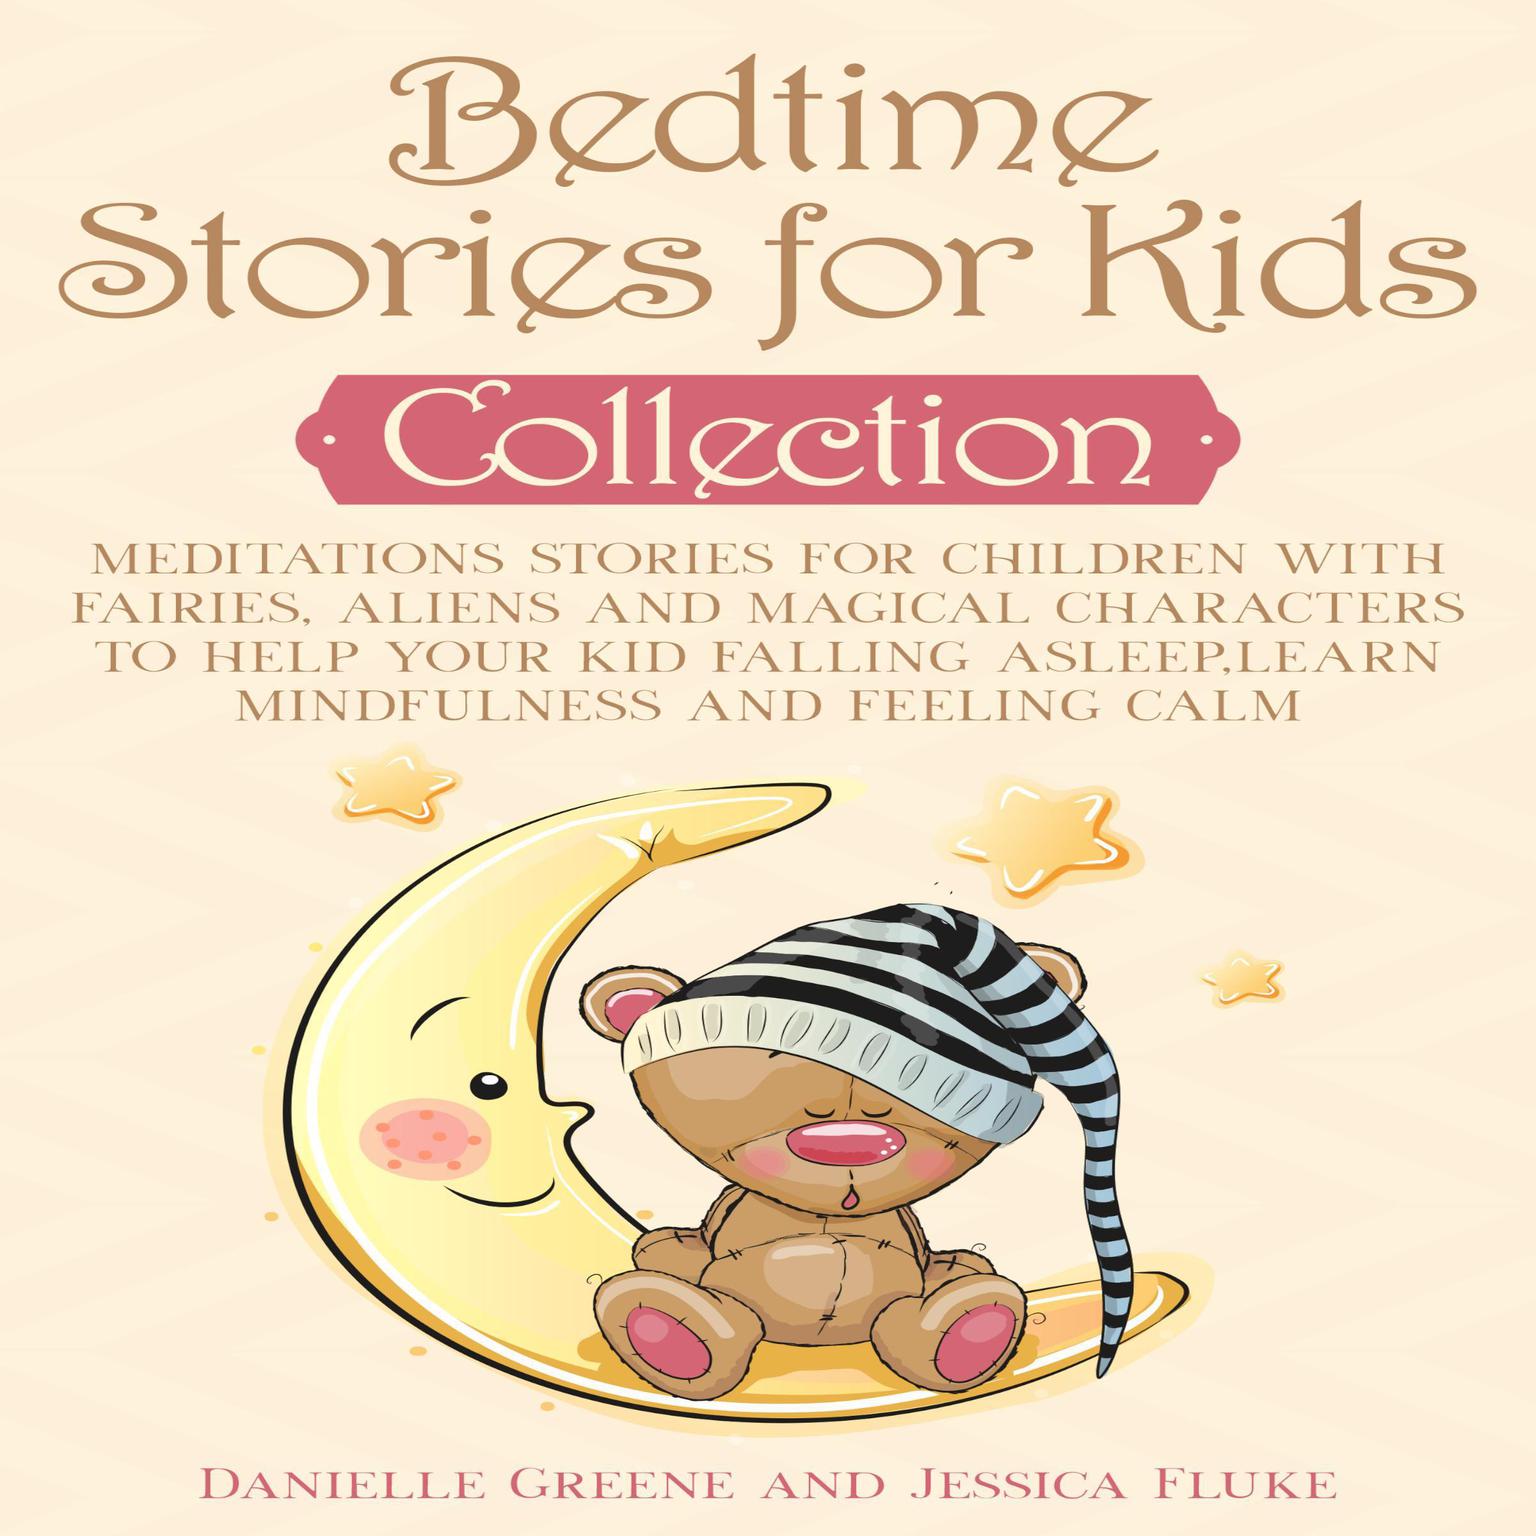 Bedtime Stories for Kids Collection: Meditations Stories for Children with Fairies, Aliens and Magical Characters to Help Your kid Falling Asleep, Learn Mindfulness and Feeling Calm Audiobook, by Danielle Greene